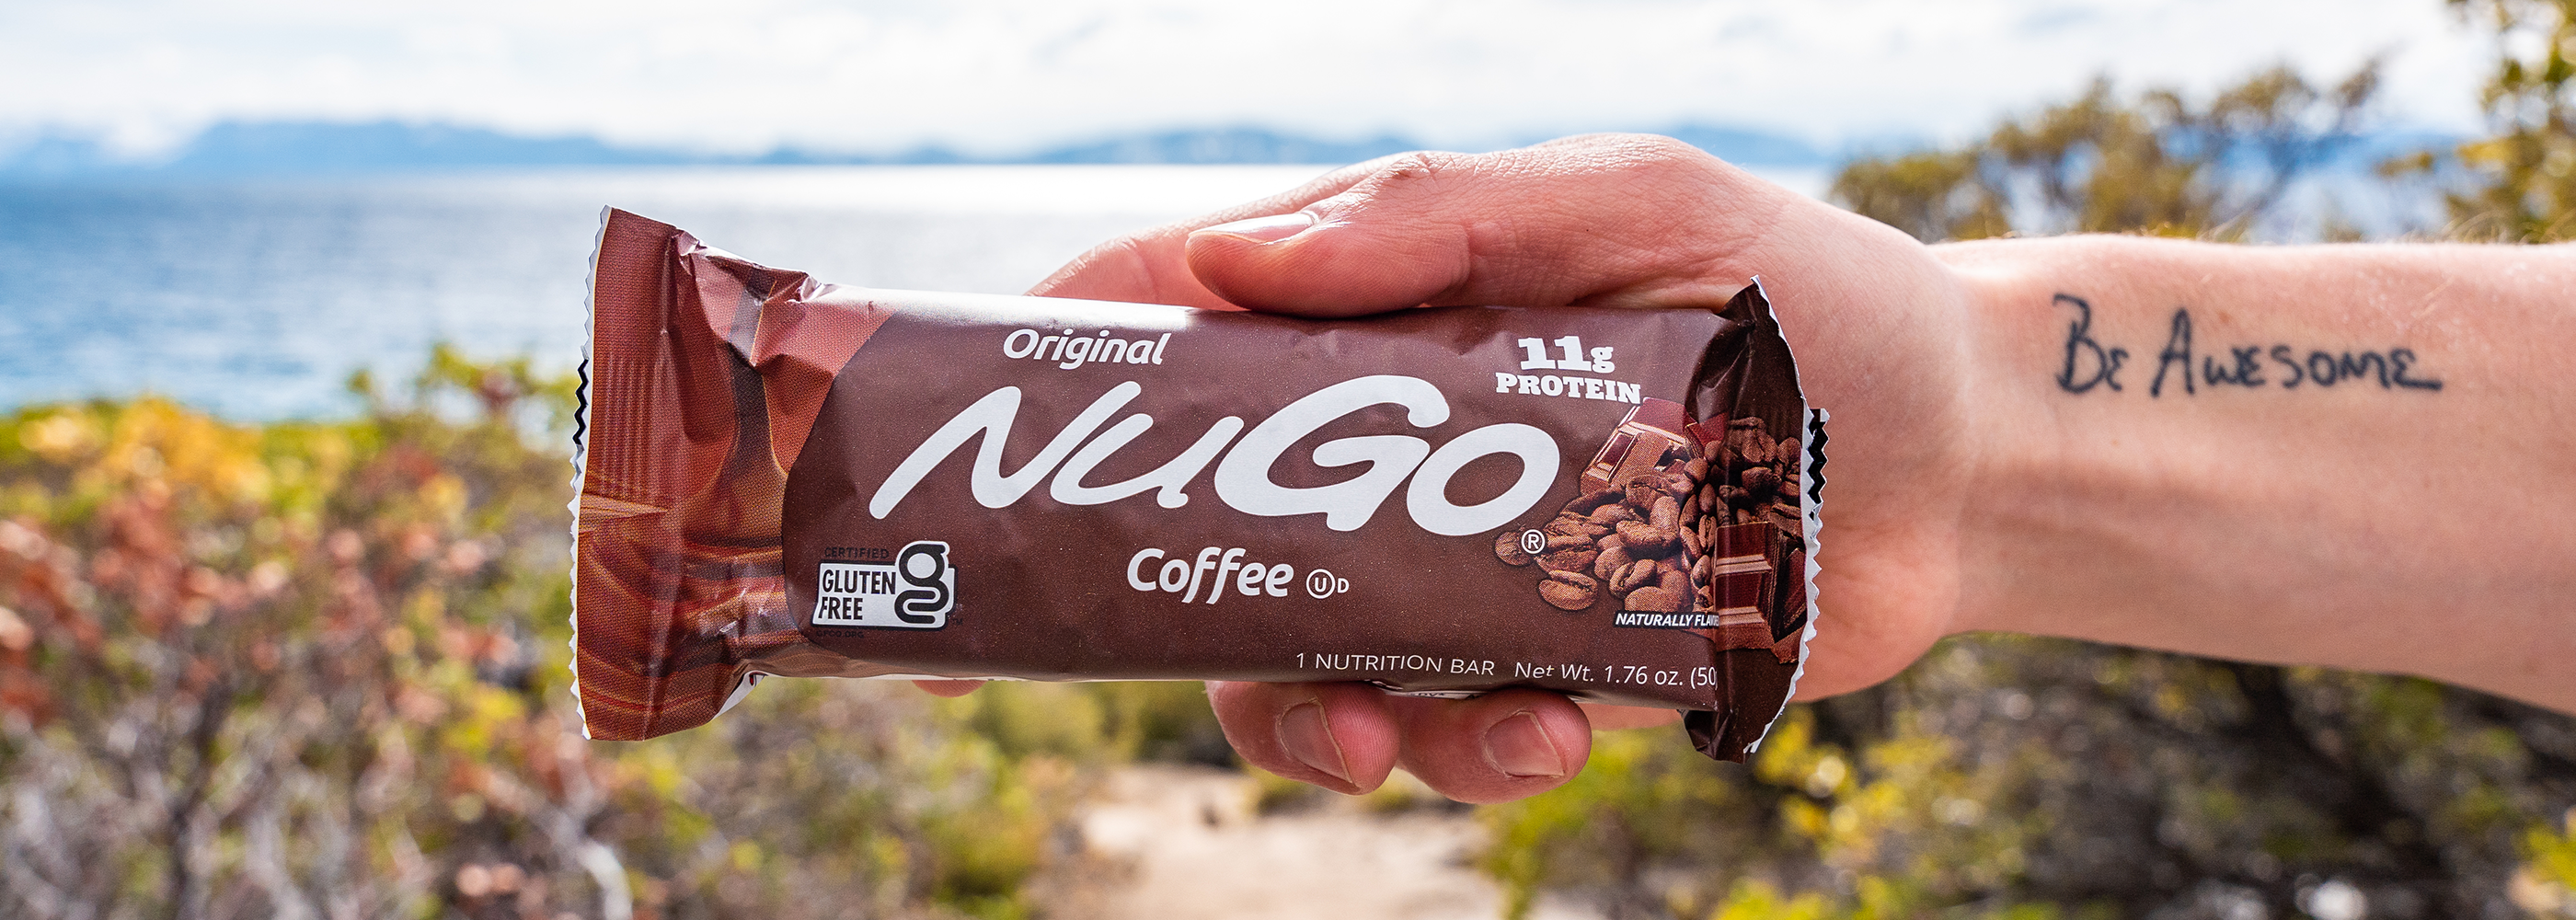 Close up NuGo Original Coffee being held in front of lake and country-scape